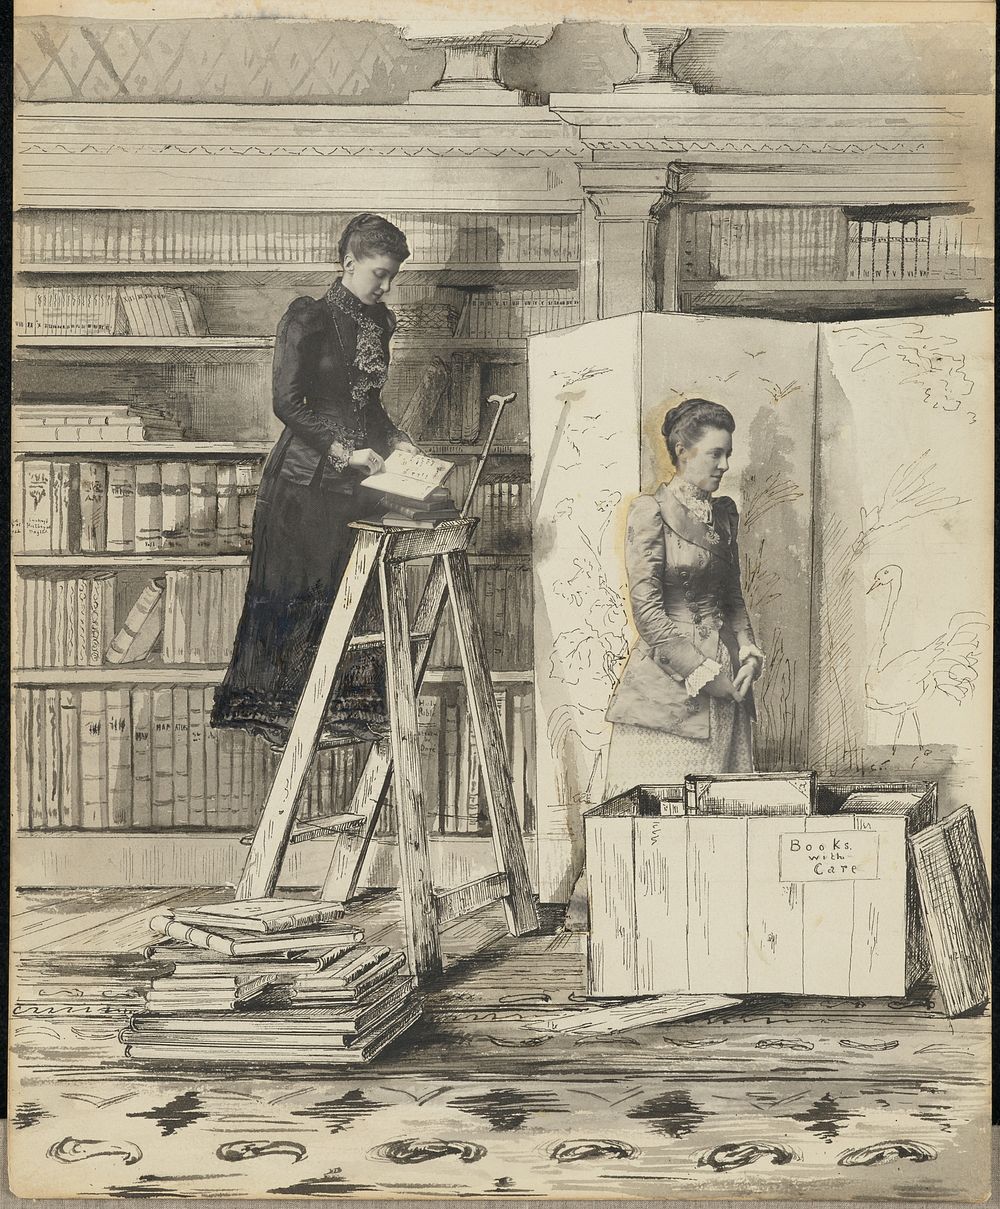 Two women in a bookshop or library